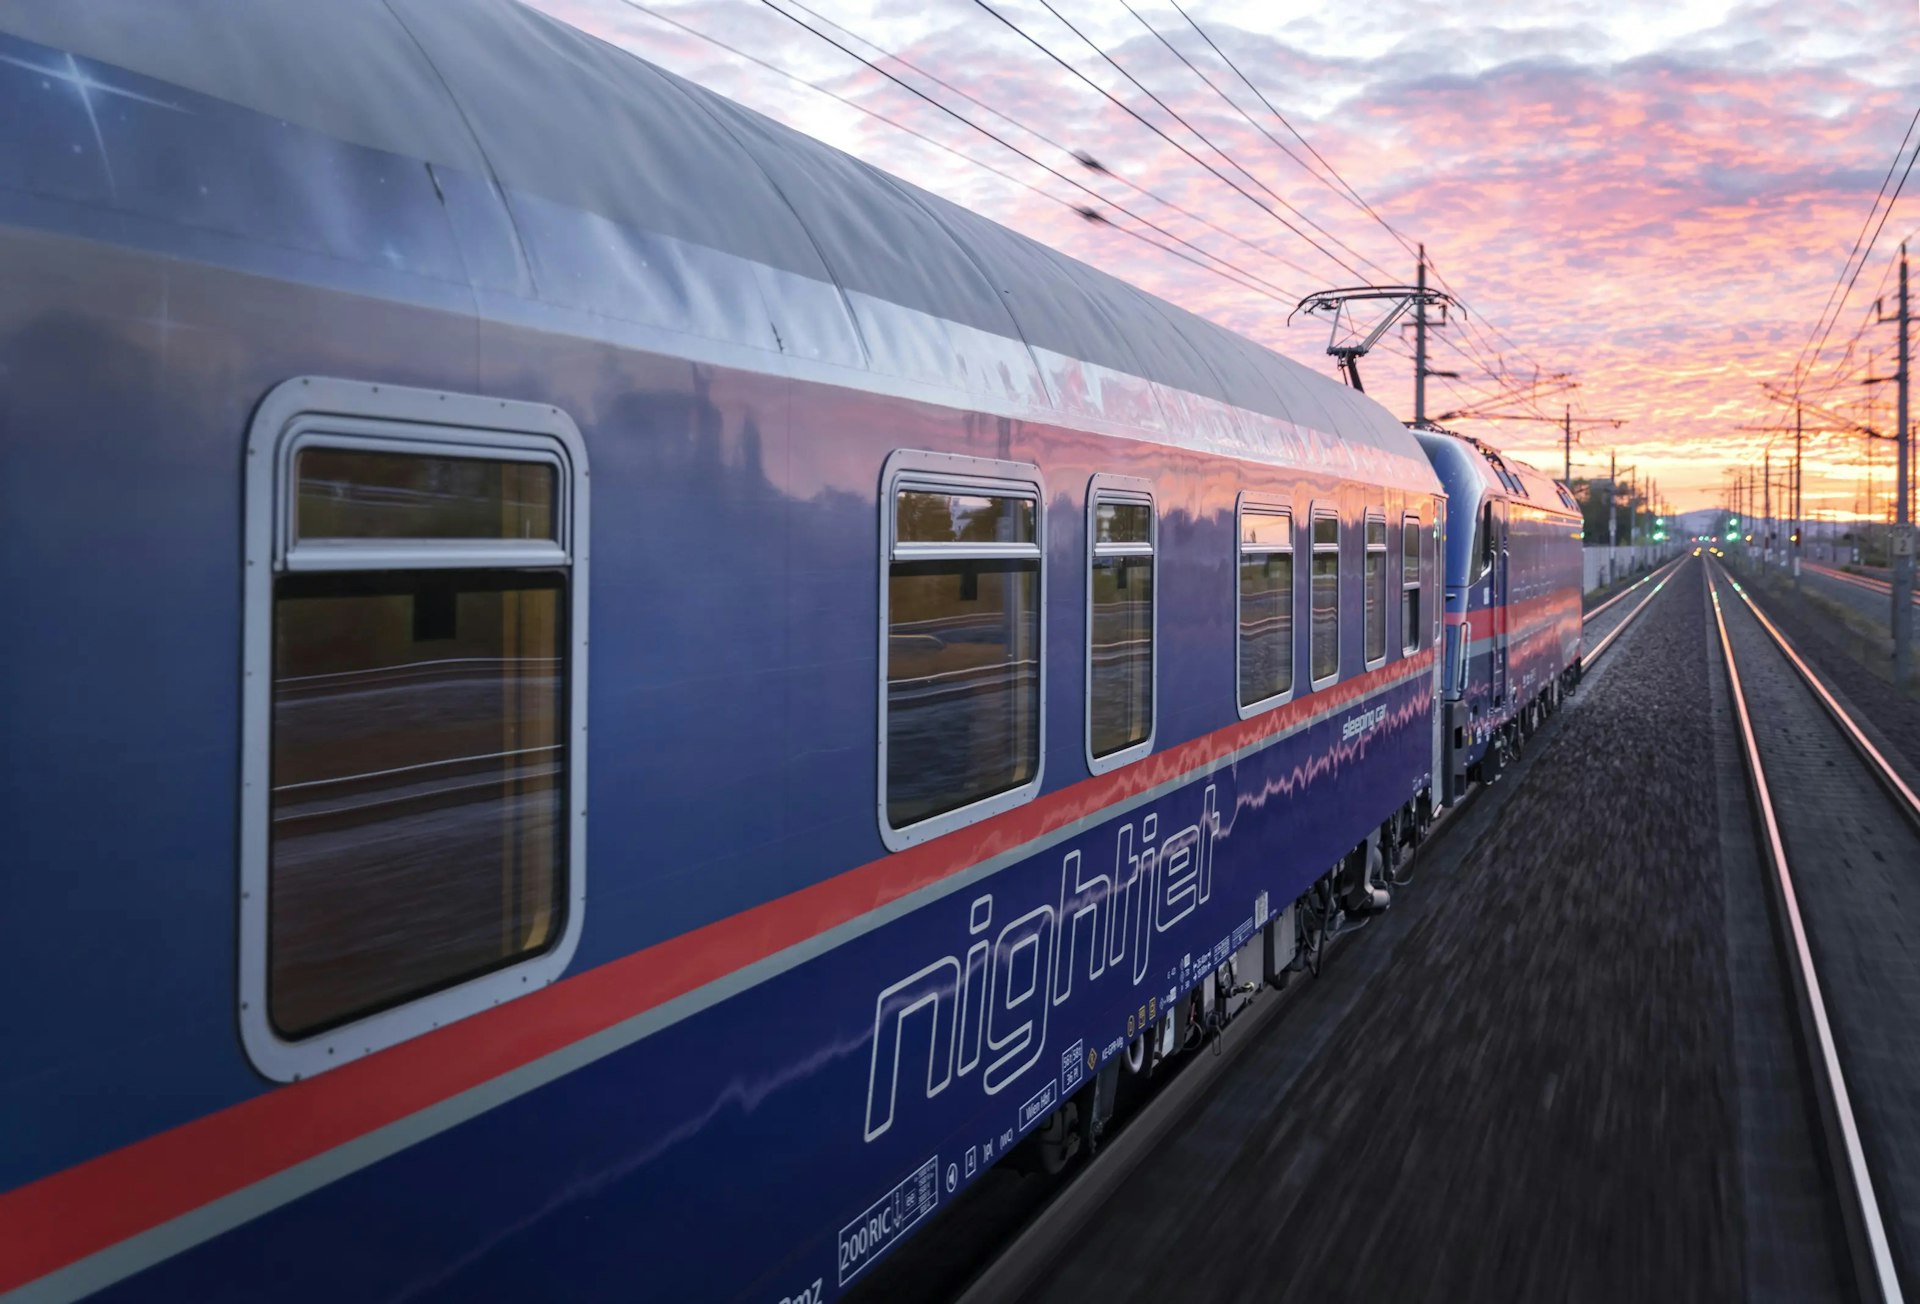 The exterior of a Nightjet train as the sun sets leaving pink and orange hues across the sky